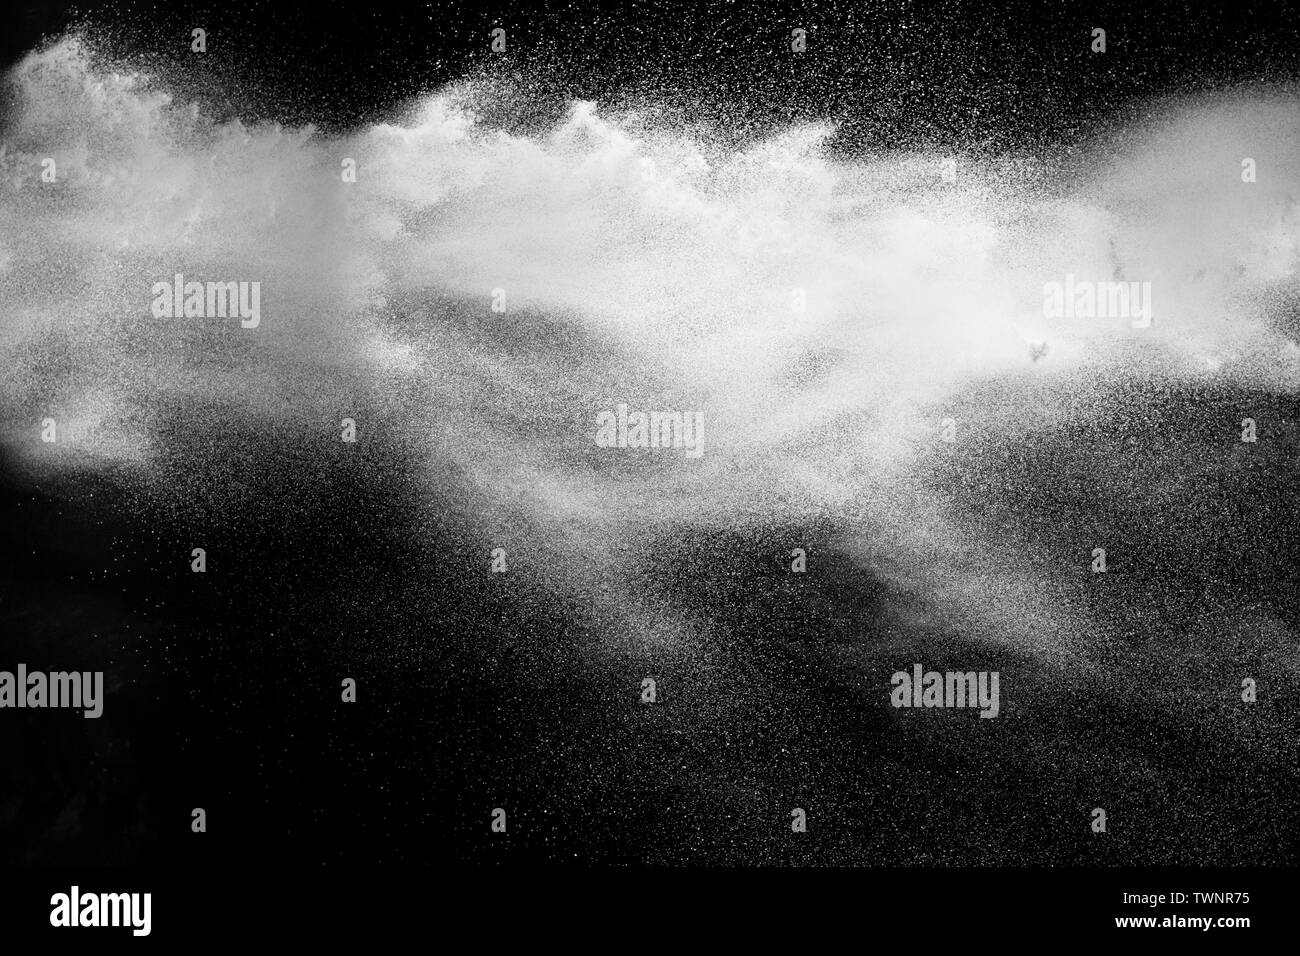 Freeze motion explosion of white powder on a black background.Stopping the movement of white dust on dark background. Stock Photo